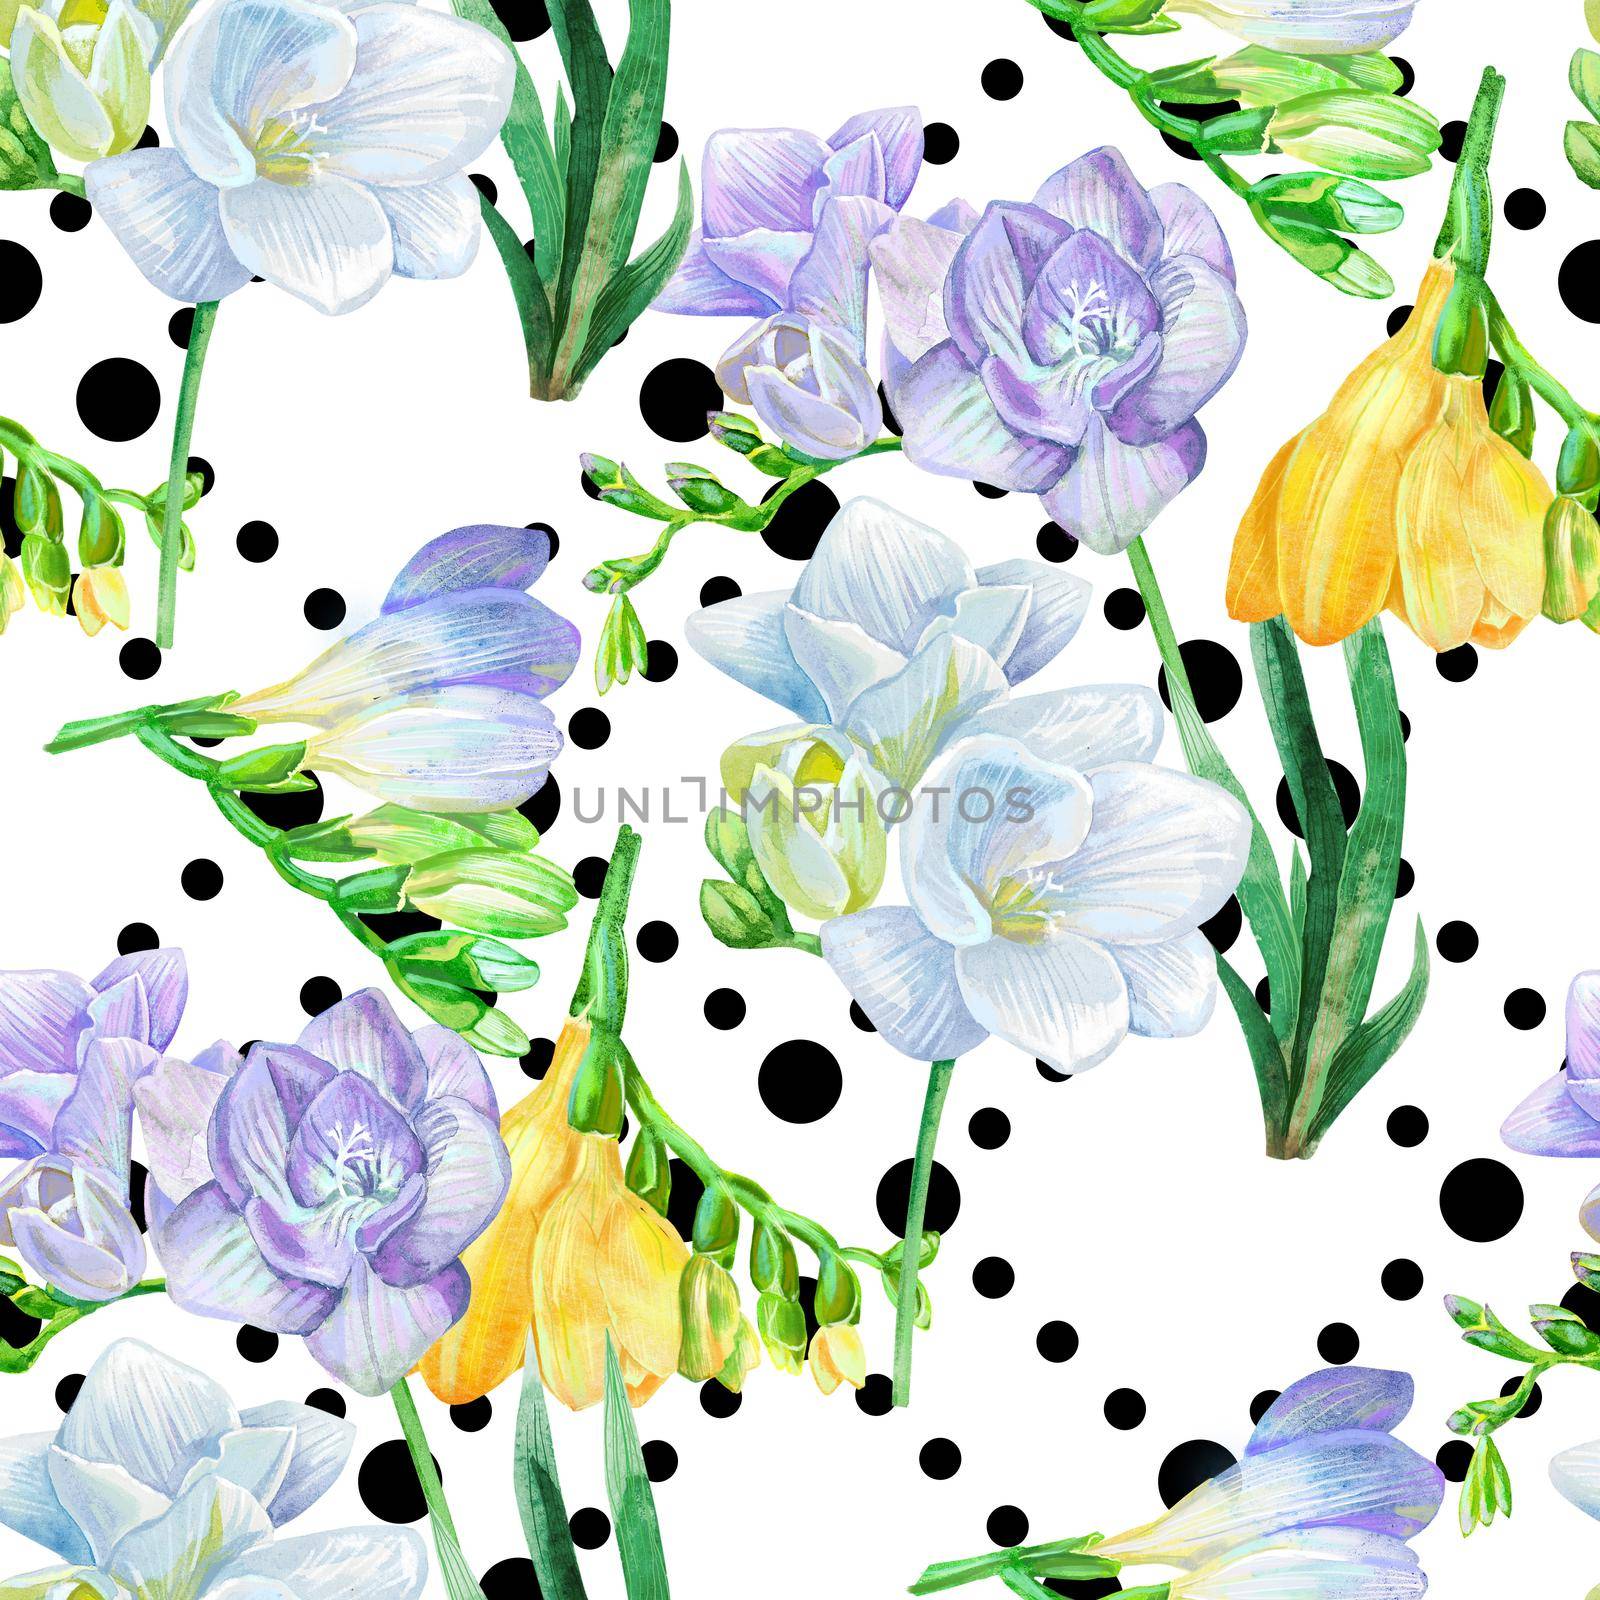 Seamless background pattern with freesia. Fabric wallpaper print texture. Aquarelle wildflower for background, texture, wrapper pattern, frame or border.